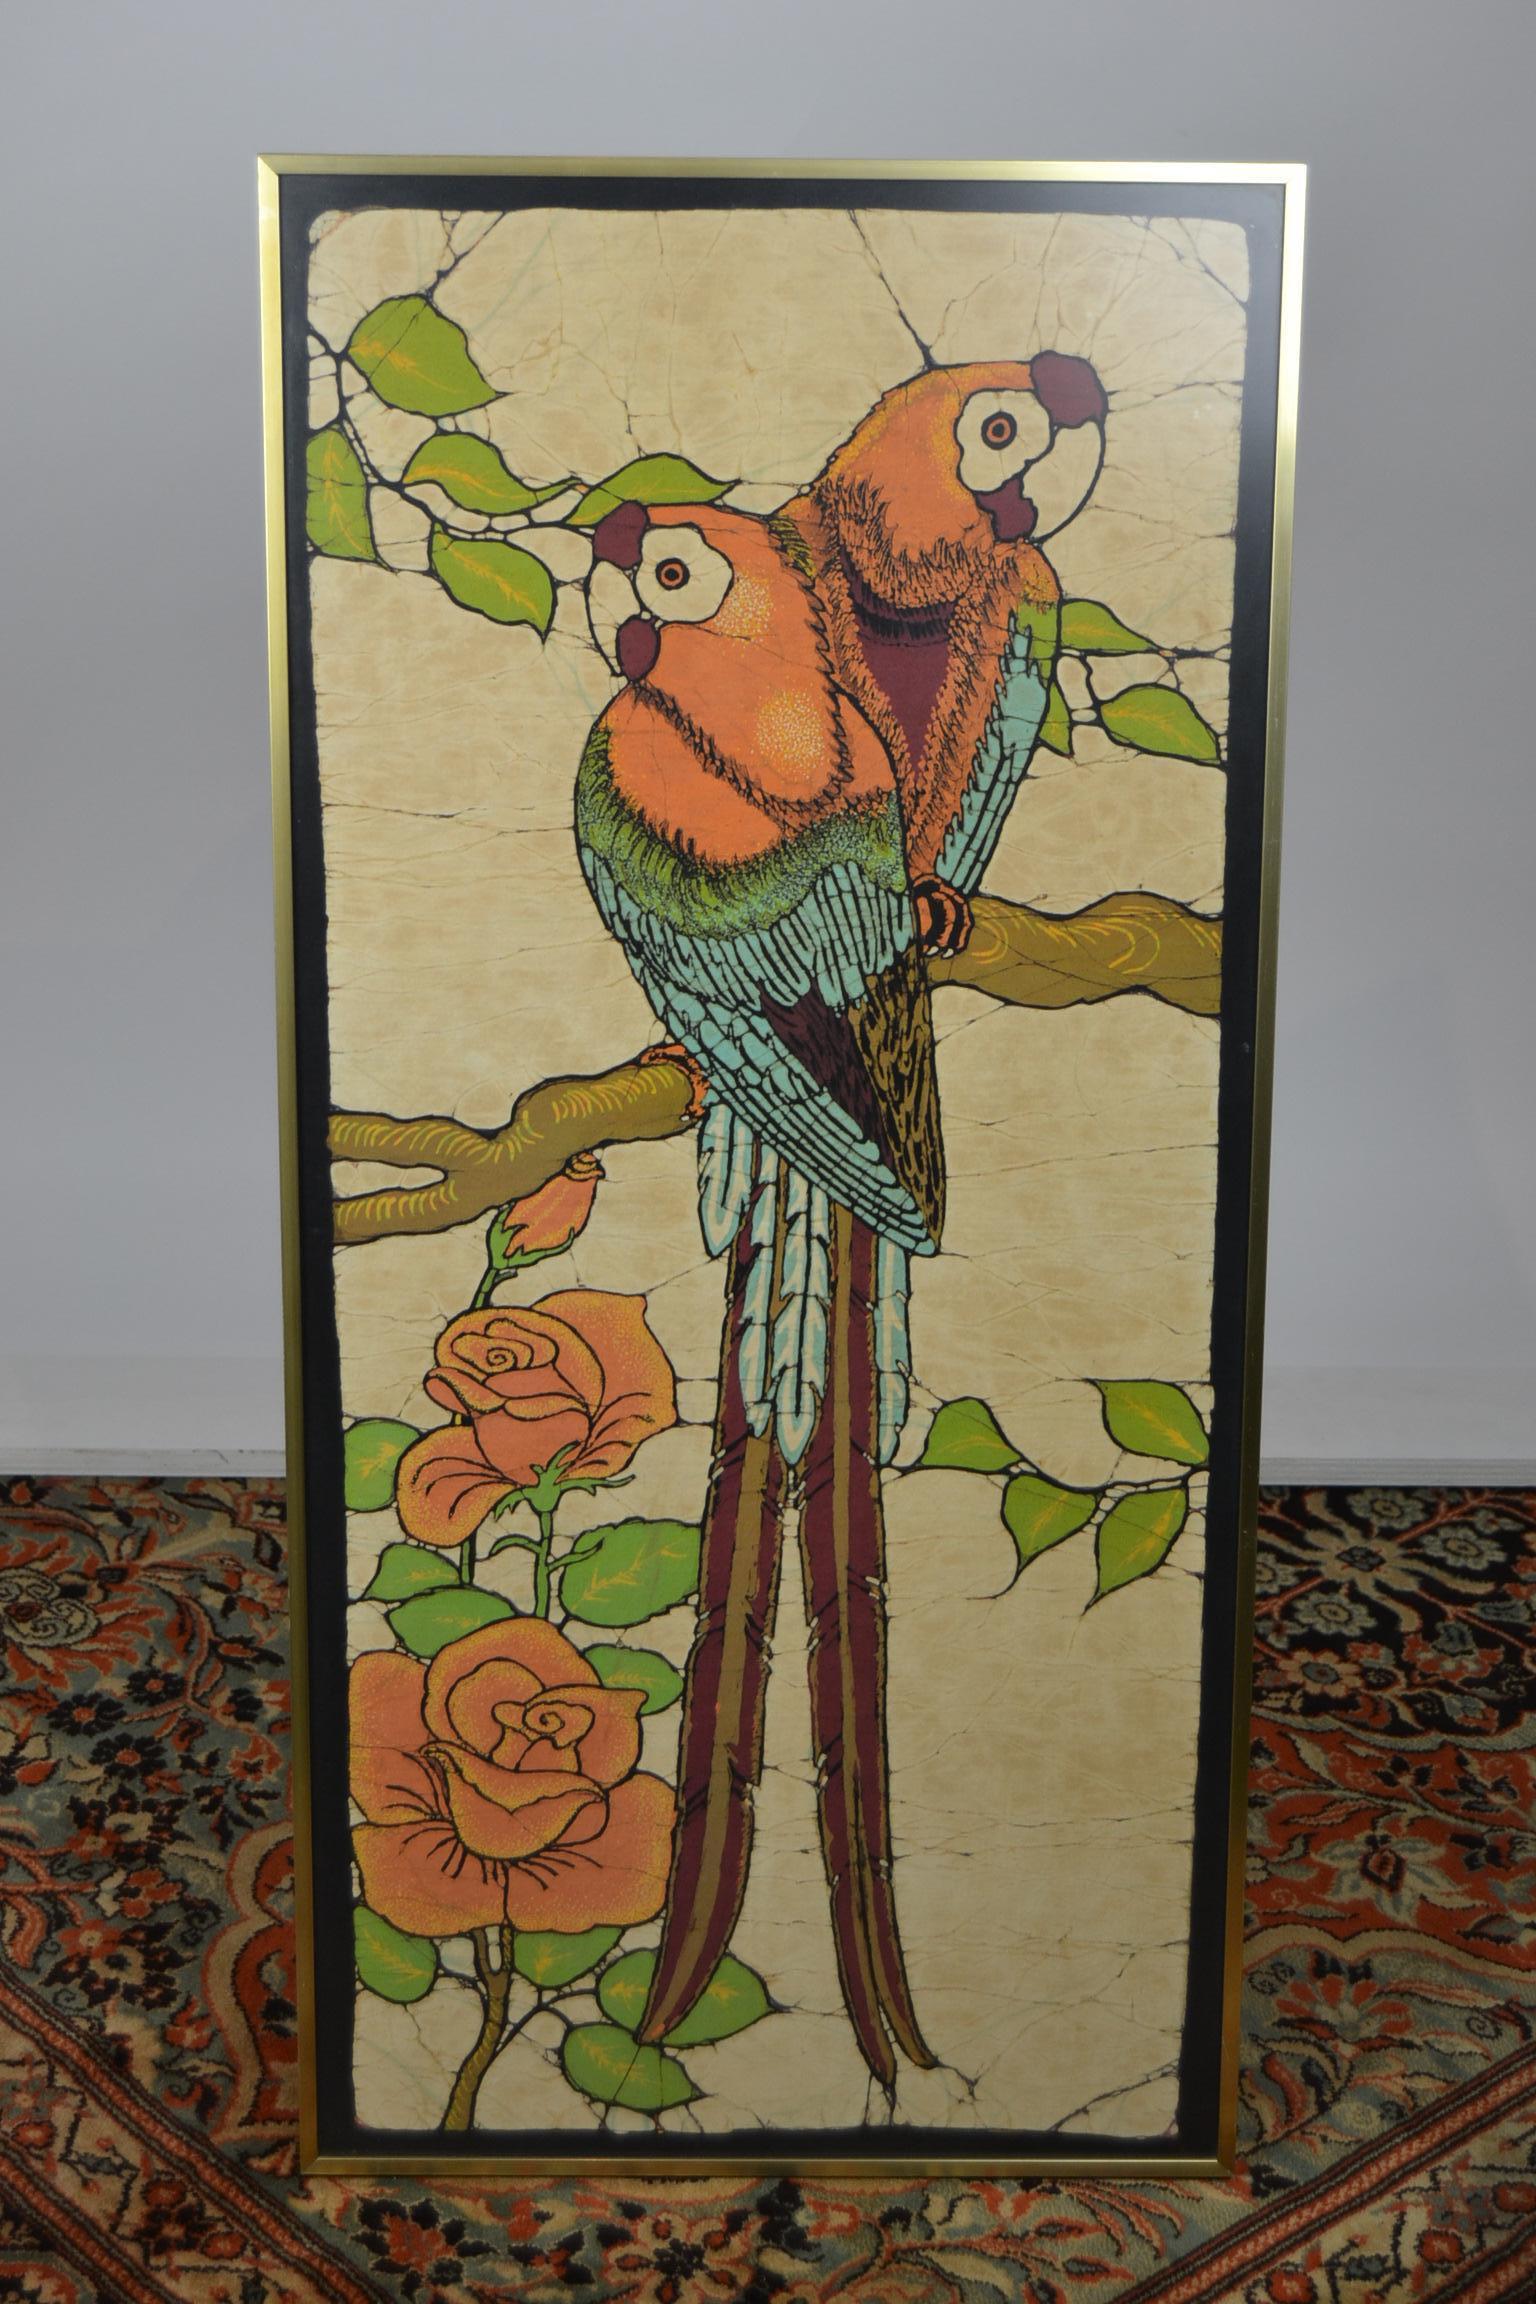 1960s Messing Framed Print on Linen with Two Ara's or Parrots in a Tree 9